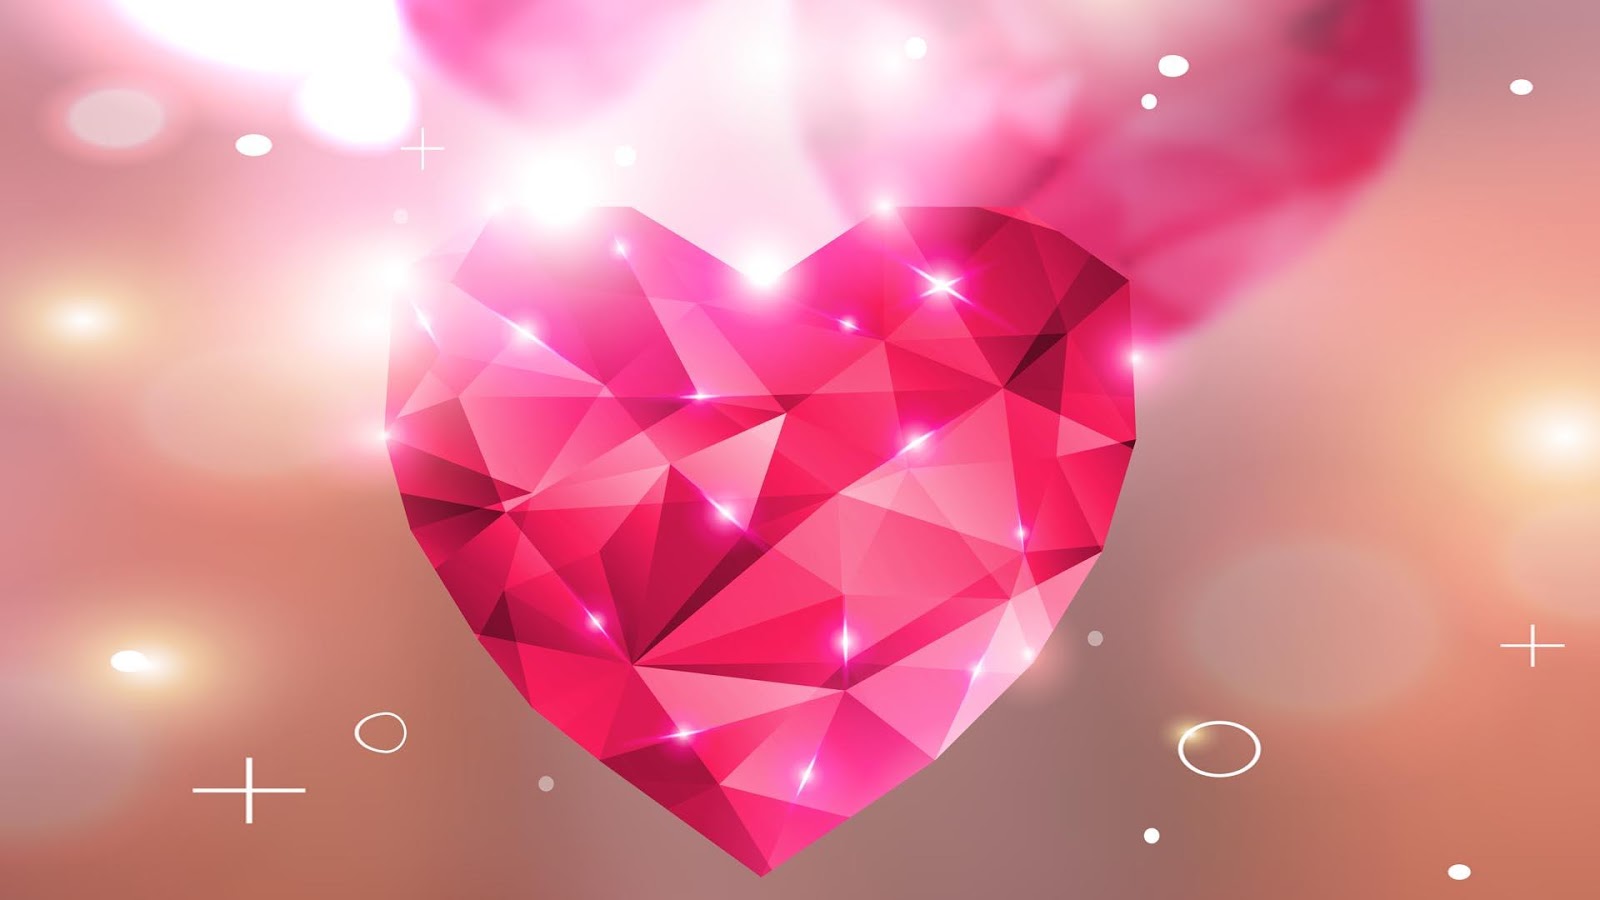 Diamond Hearts Live Wallpaper Android Apps On Google Play